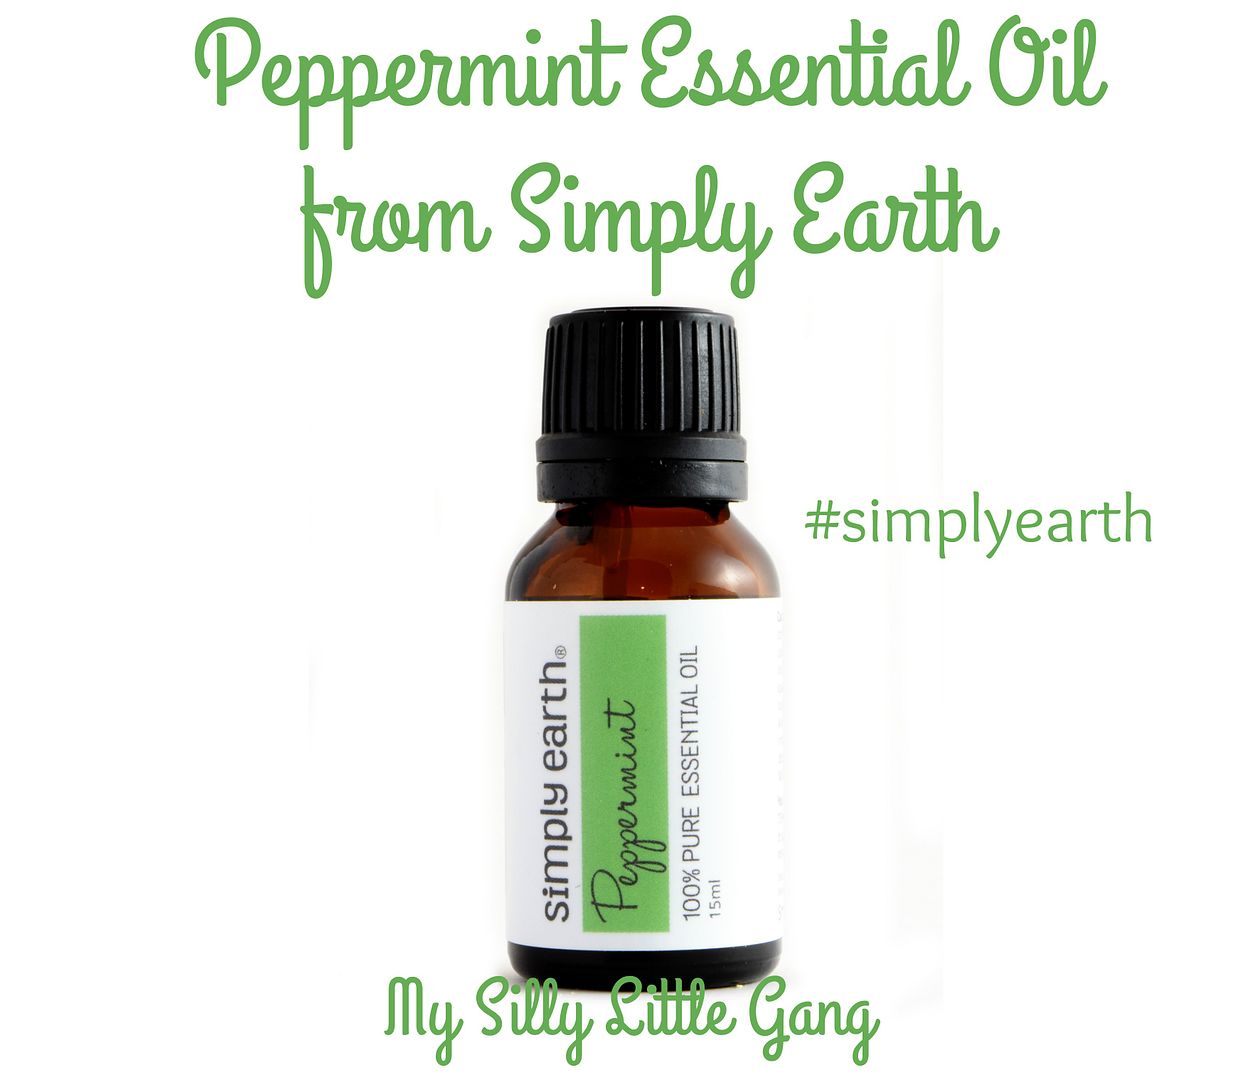 peppermint-essential-oil